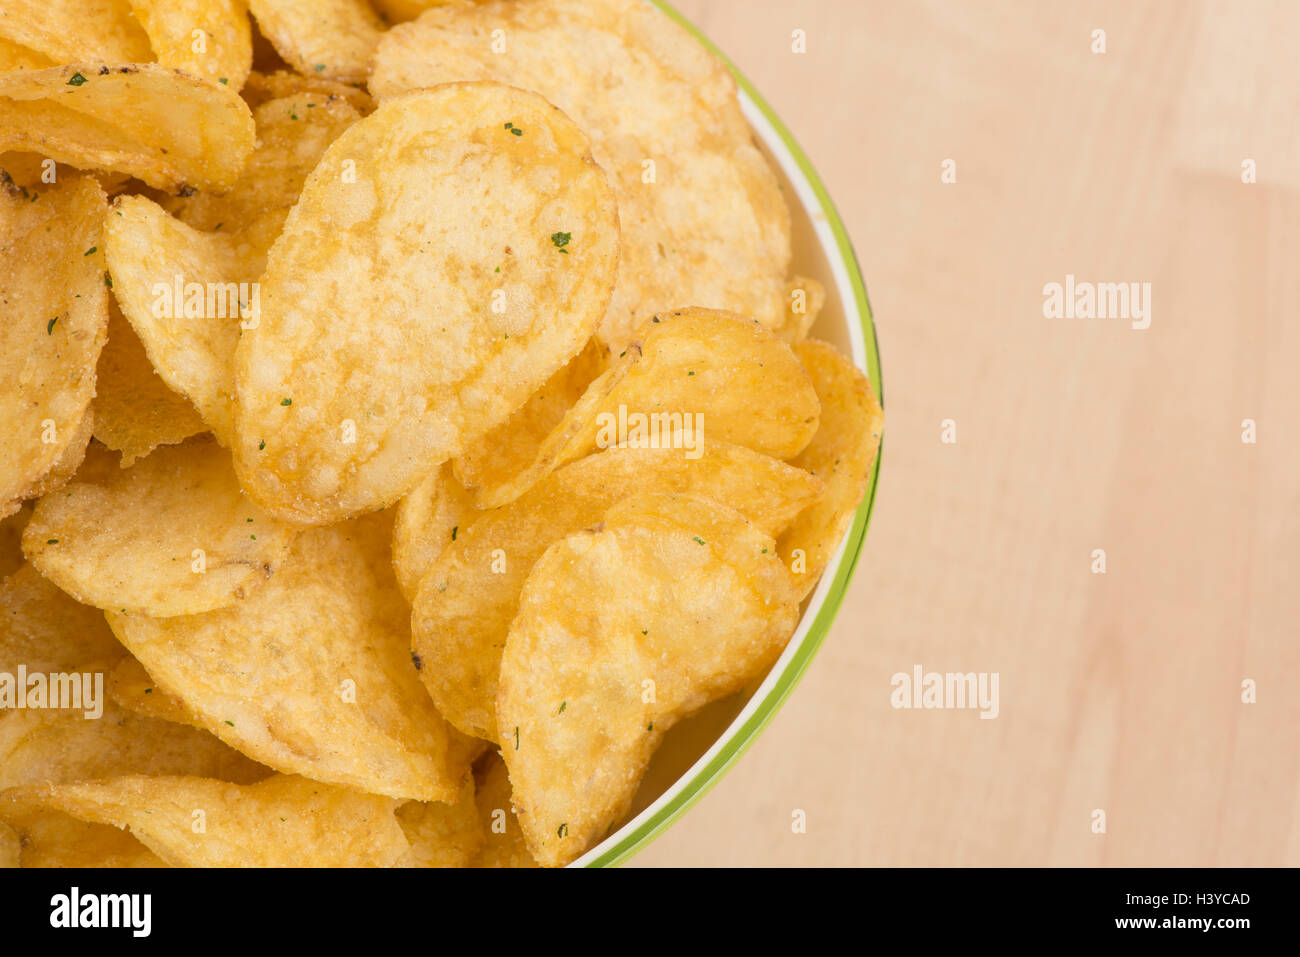 Potato chips in bowl on table. Close up of salty and fat snack. Unhealthy eating. Stock Photo